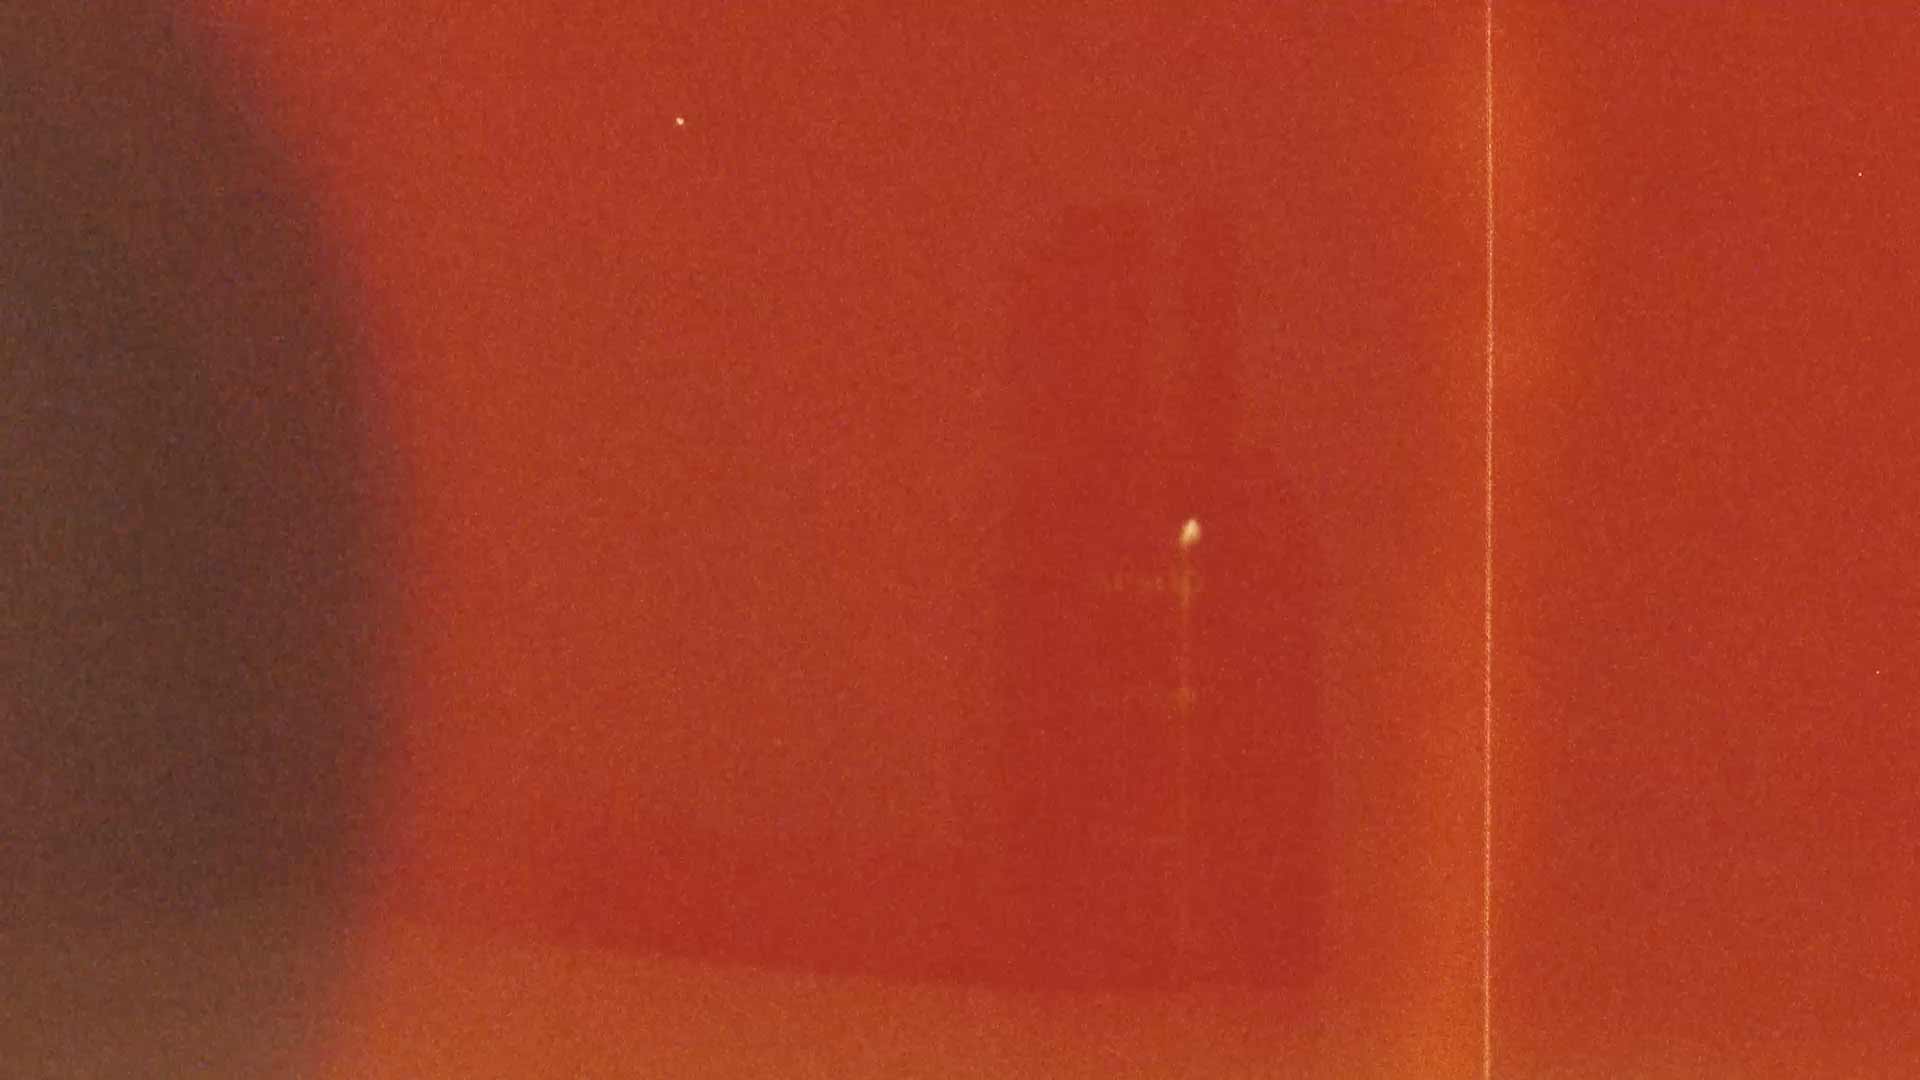 A silhouette of Ouranon EDP bottle behind the red textured filter